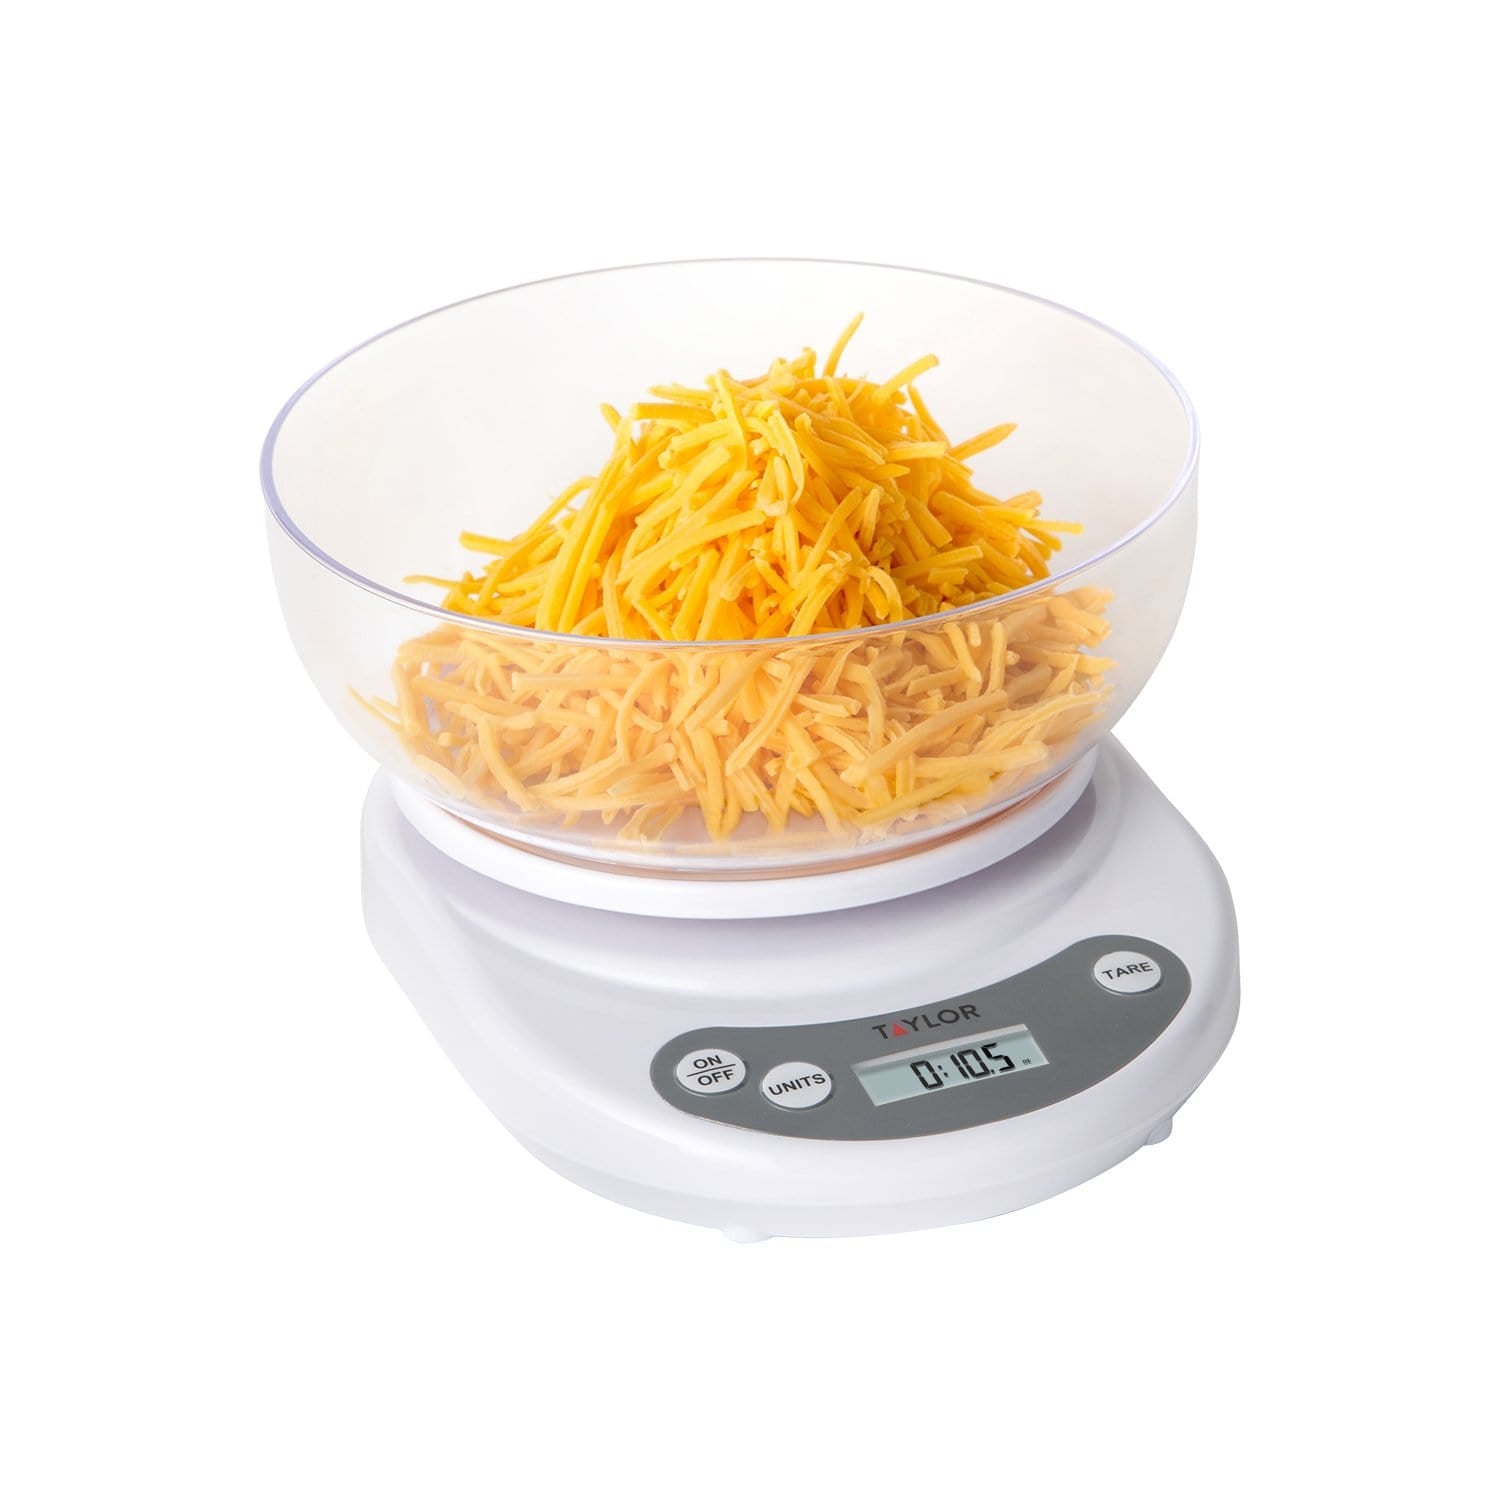 Digital Measuring Cup Scale - The Curated Crave